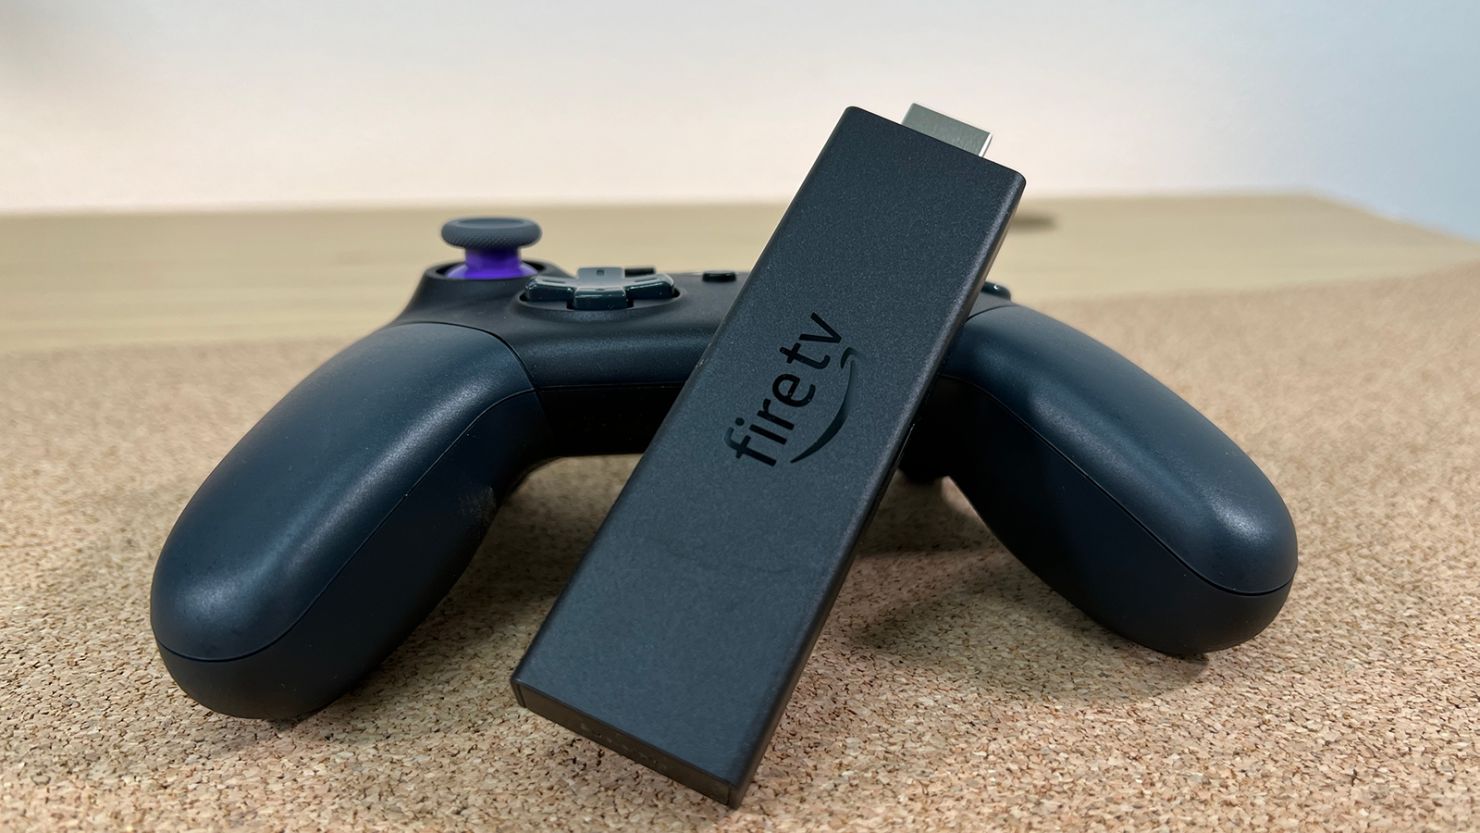 Fire TV Stick 4K Max review